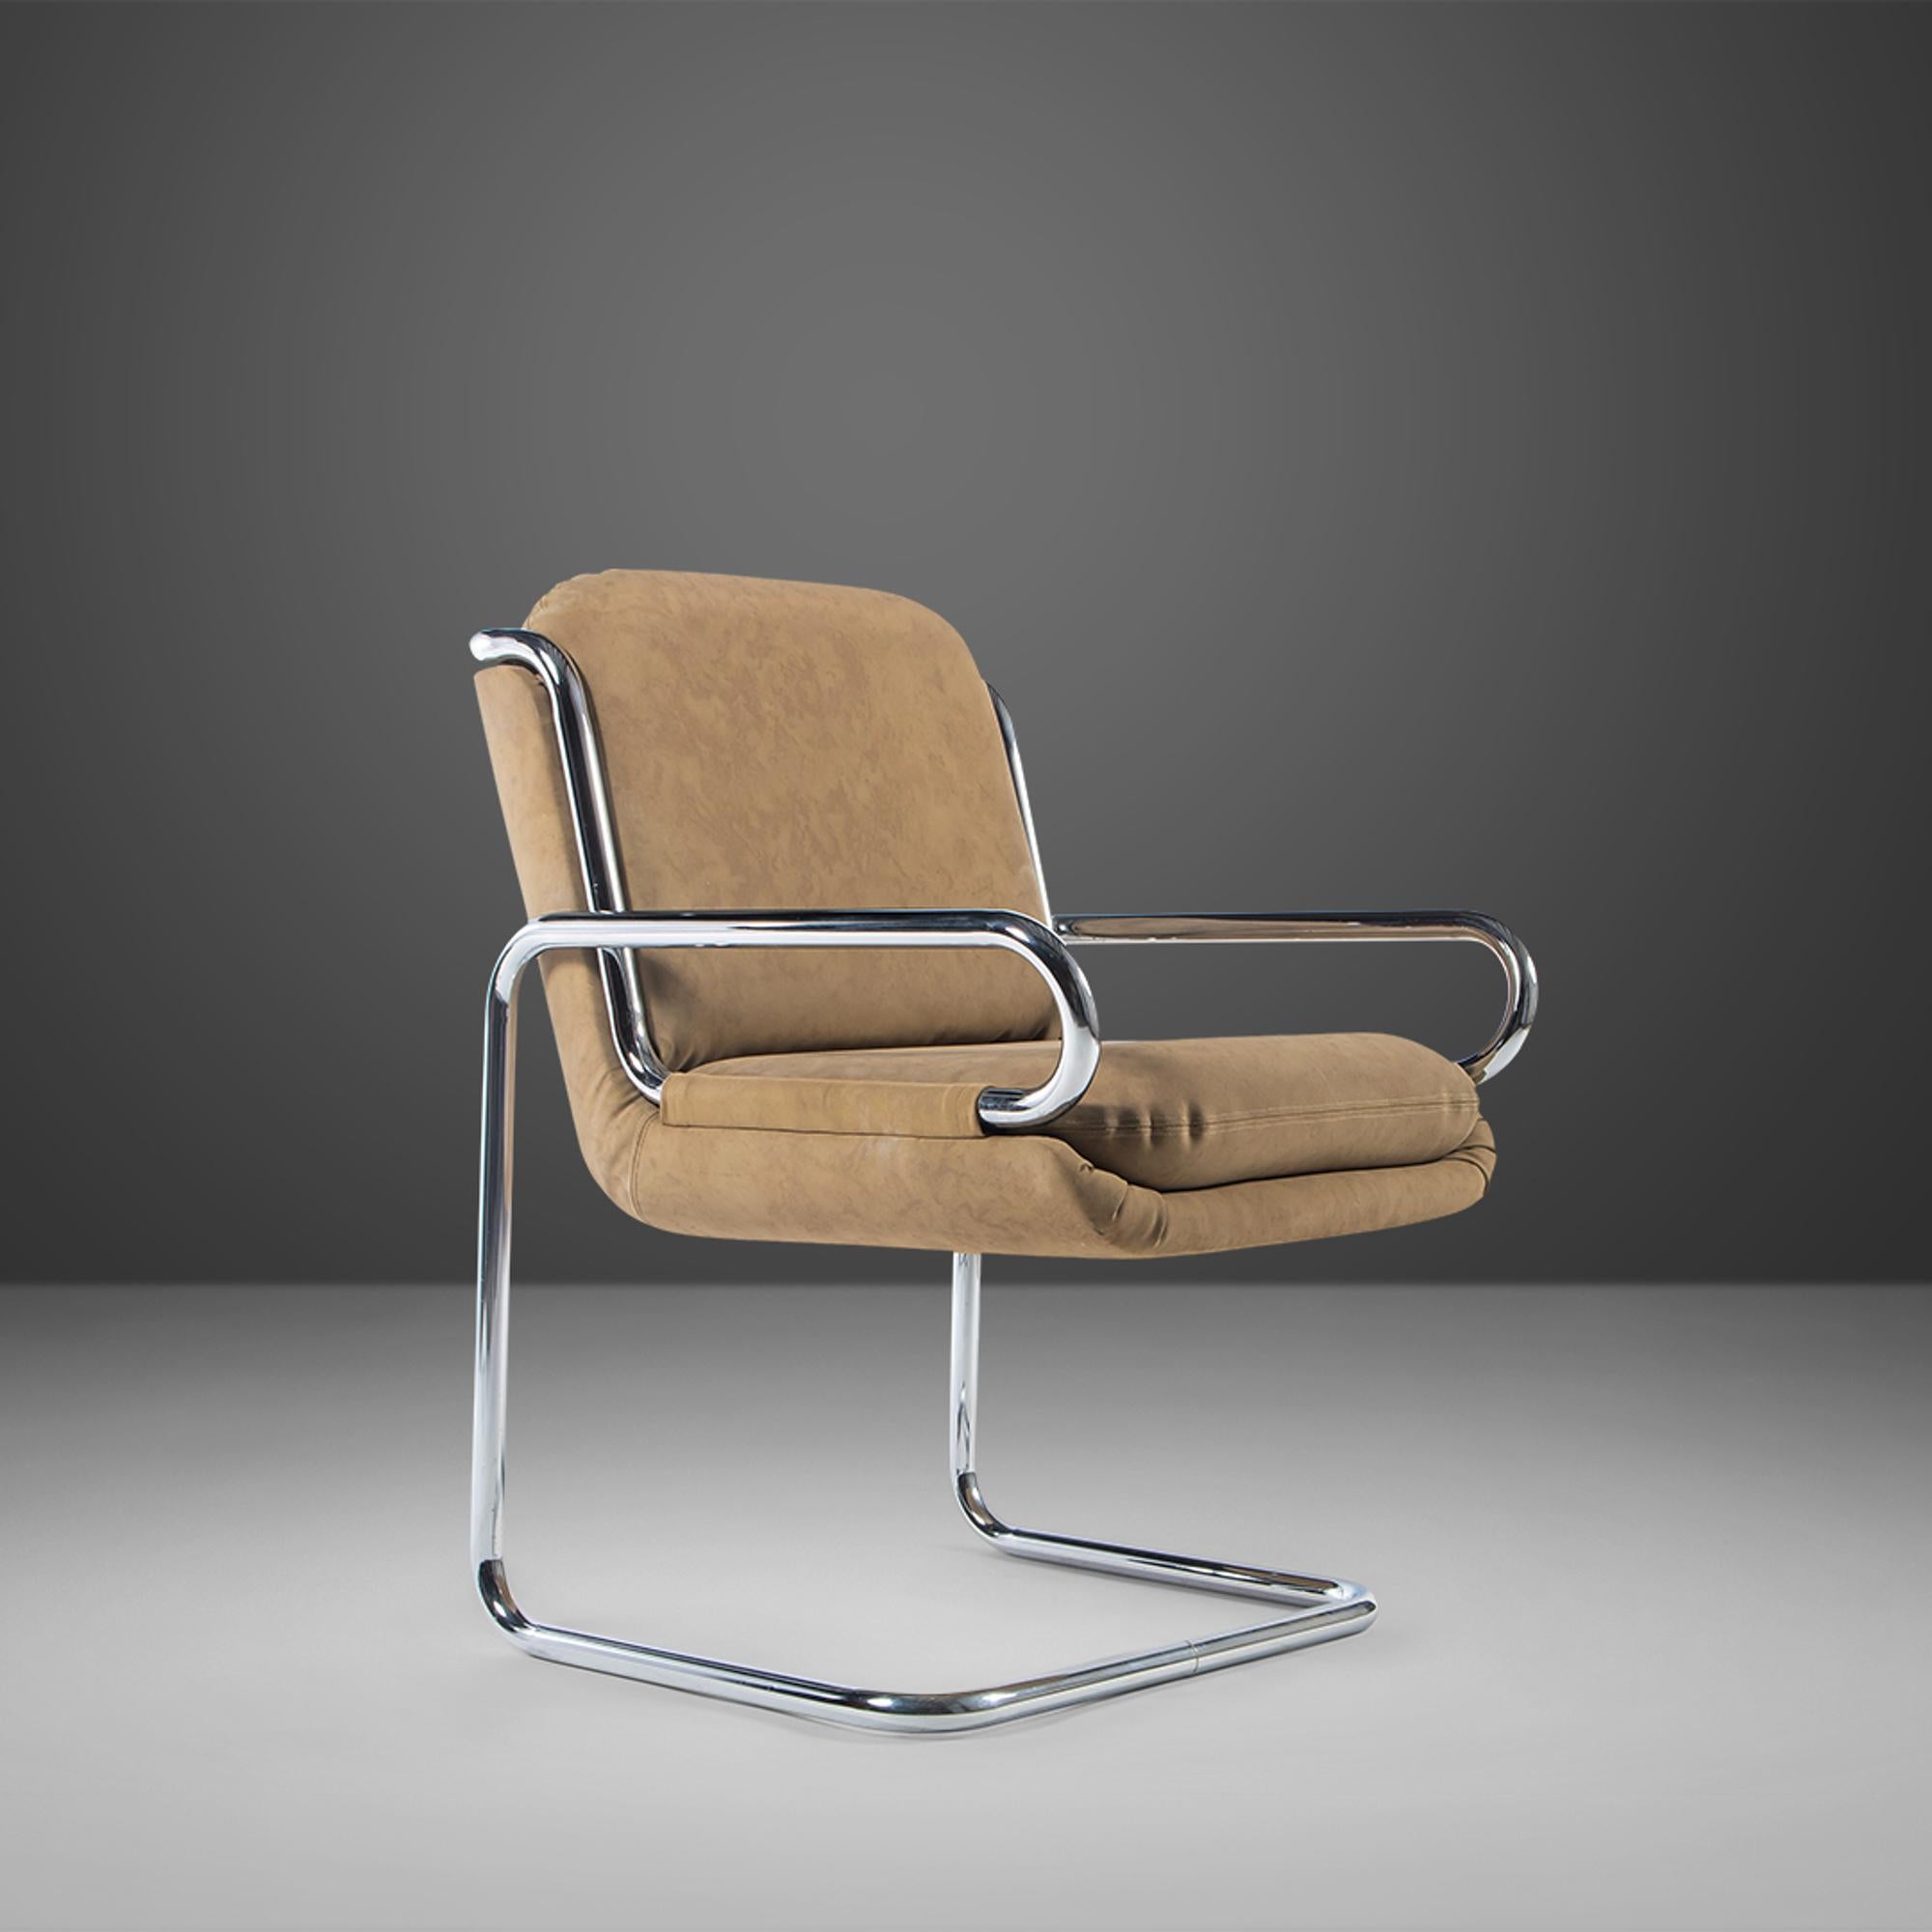 Constructed from tubular chrome. The seats are found in a camel micro suede fabric. 1970s.

---Dimensions---
Width: 24.5 in / 62.23 cm
Depth: 28 in / 71.12 cm
Height: 34 in / 86.36 cm
Seat Height: 20 in / 50.8 cm

This striking set of chairs is in